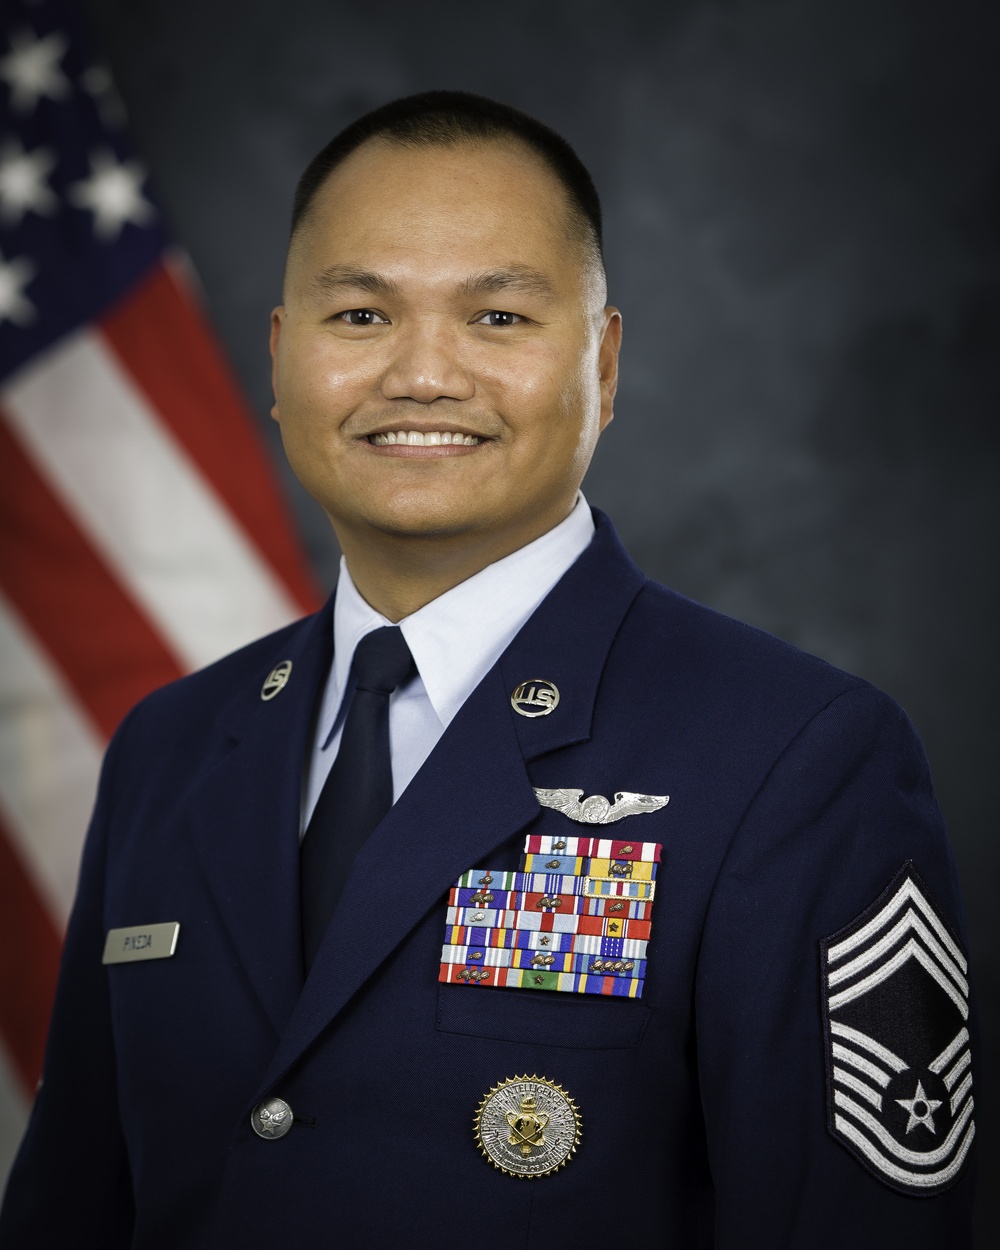 Official portrait, Chief Master Sgt. Edward D. Pineda, US Air Force